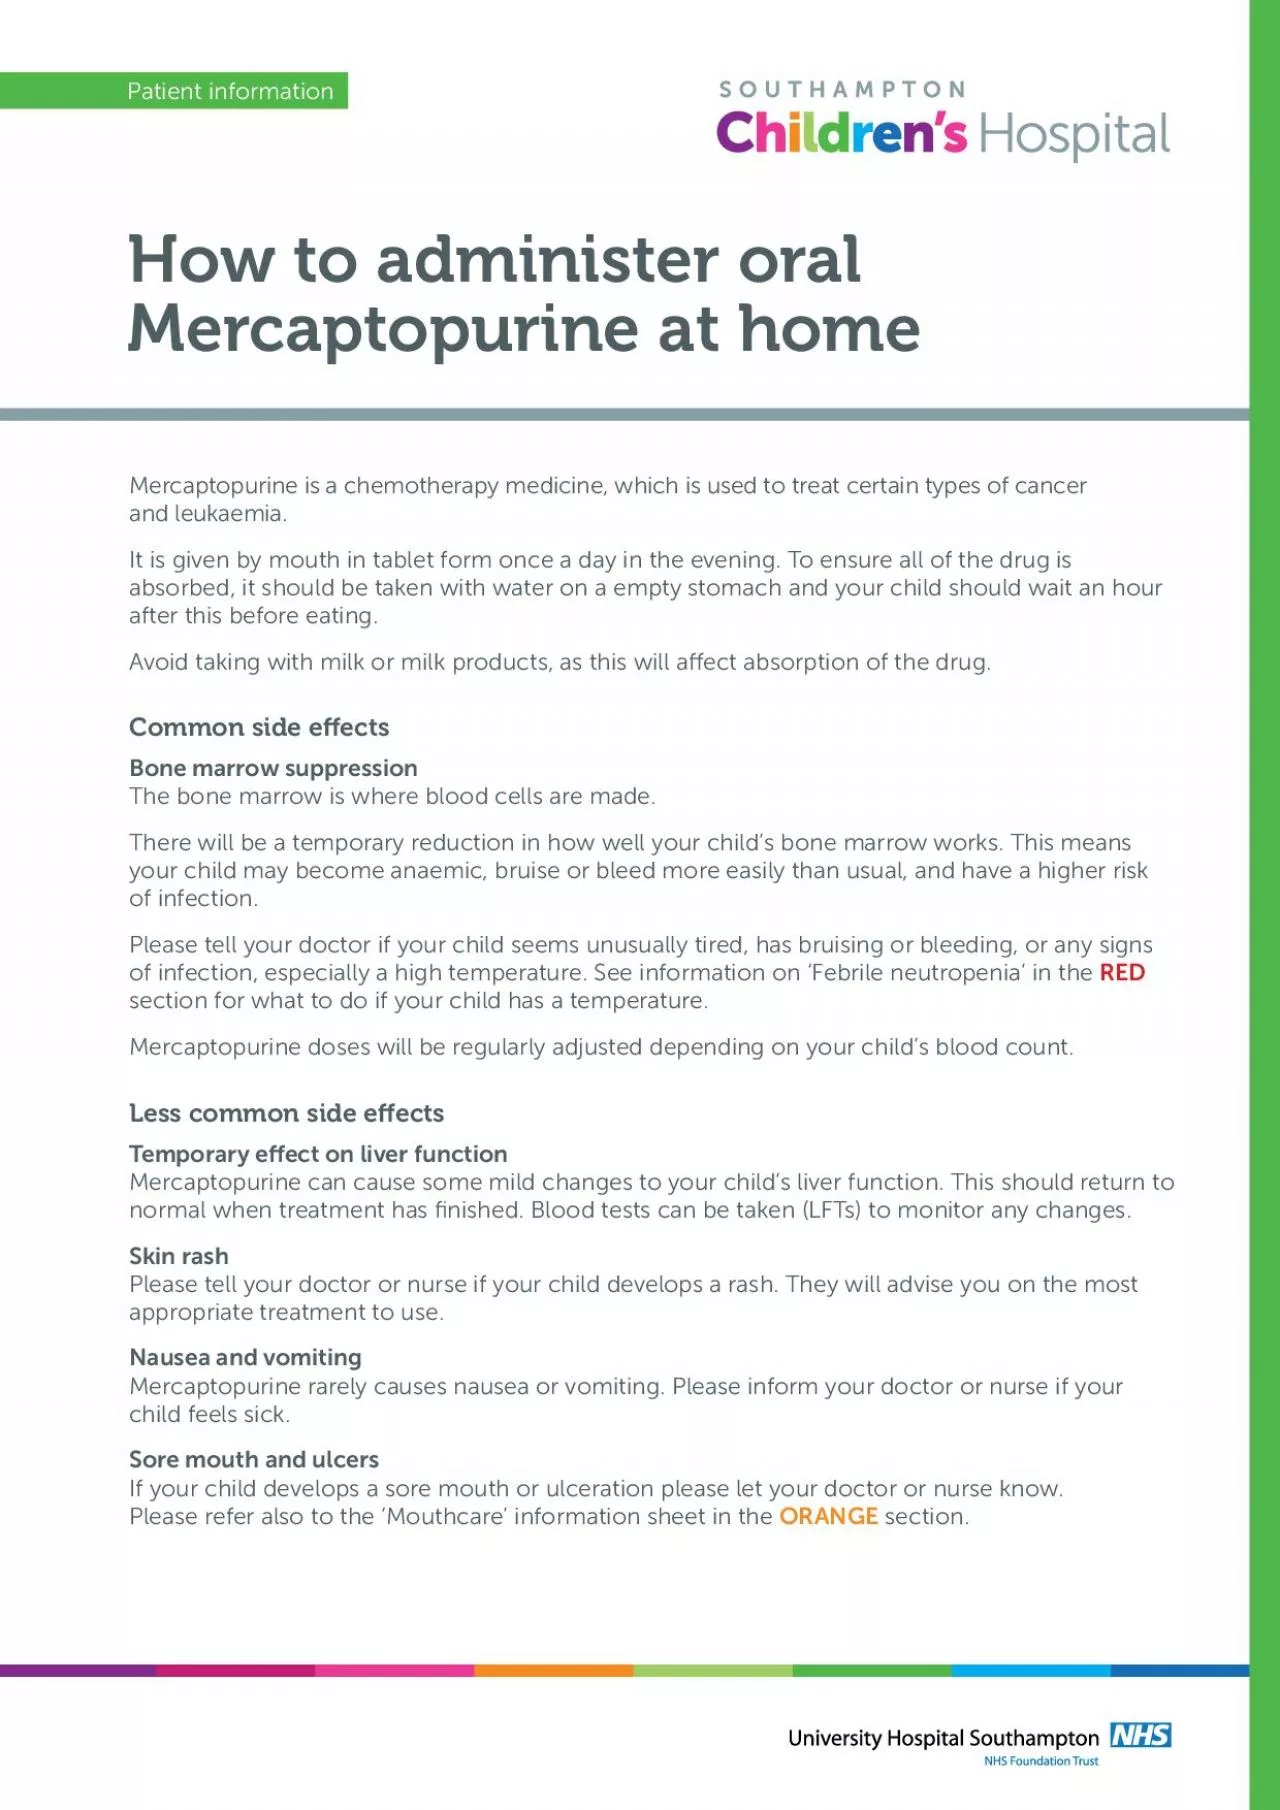 Mercaptopurine is a chemotherapy medicine which is used to treat cert